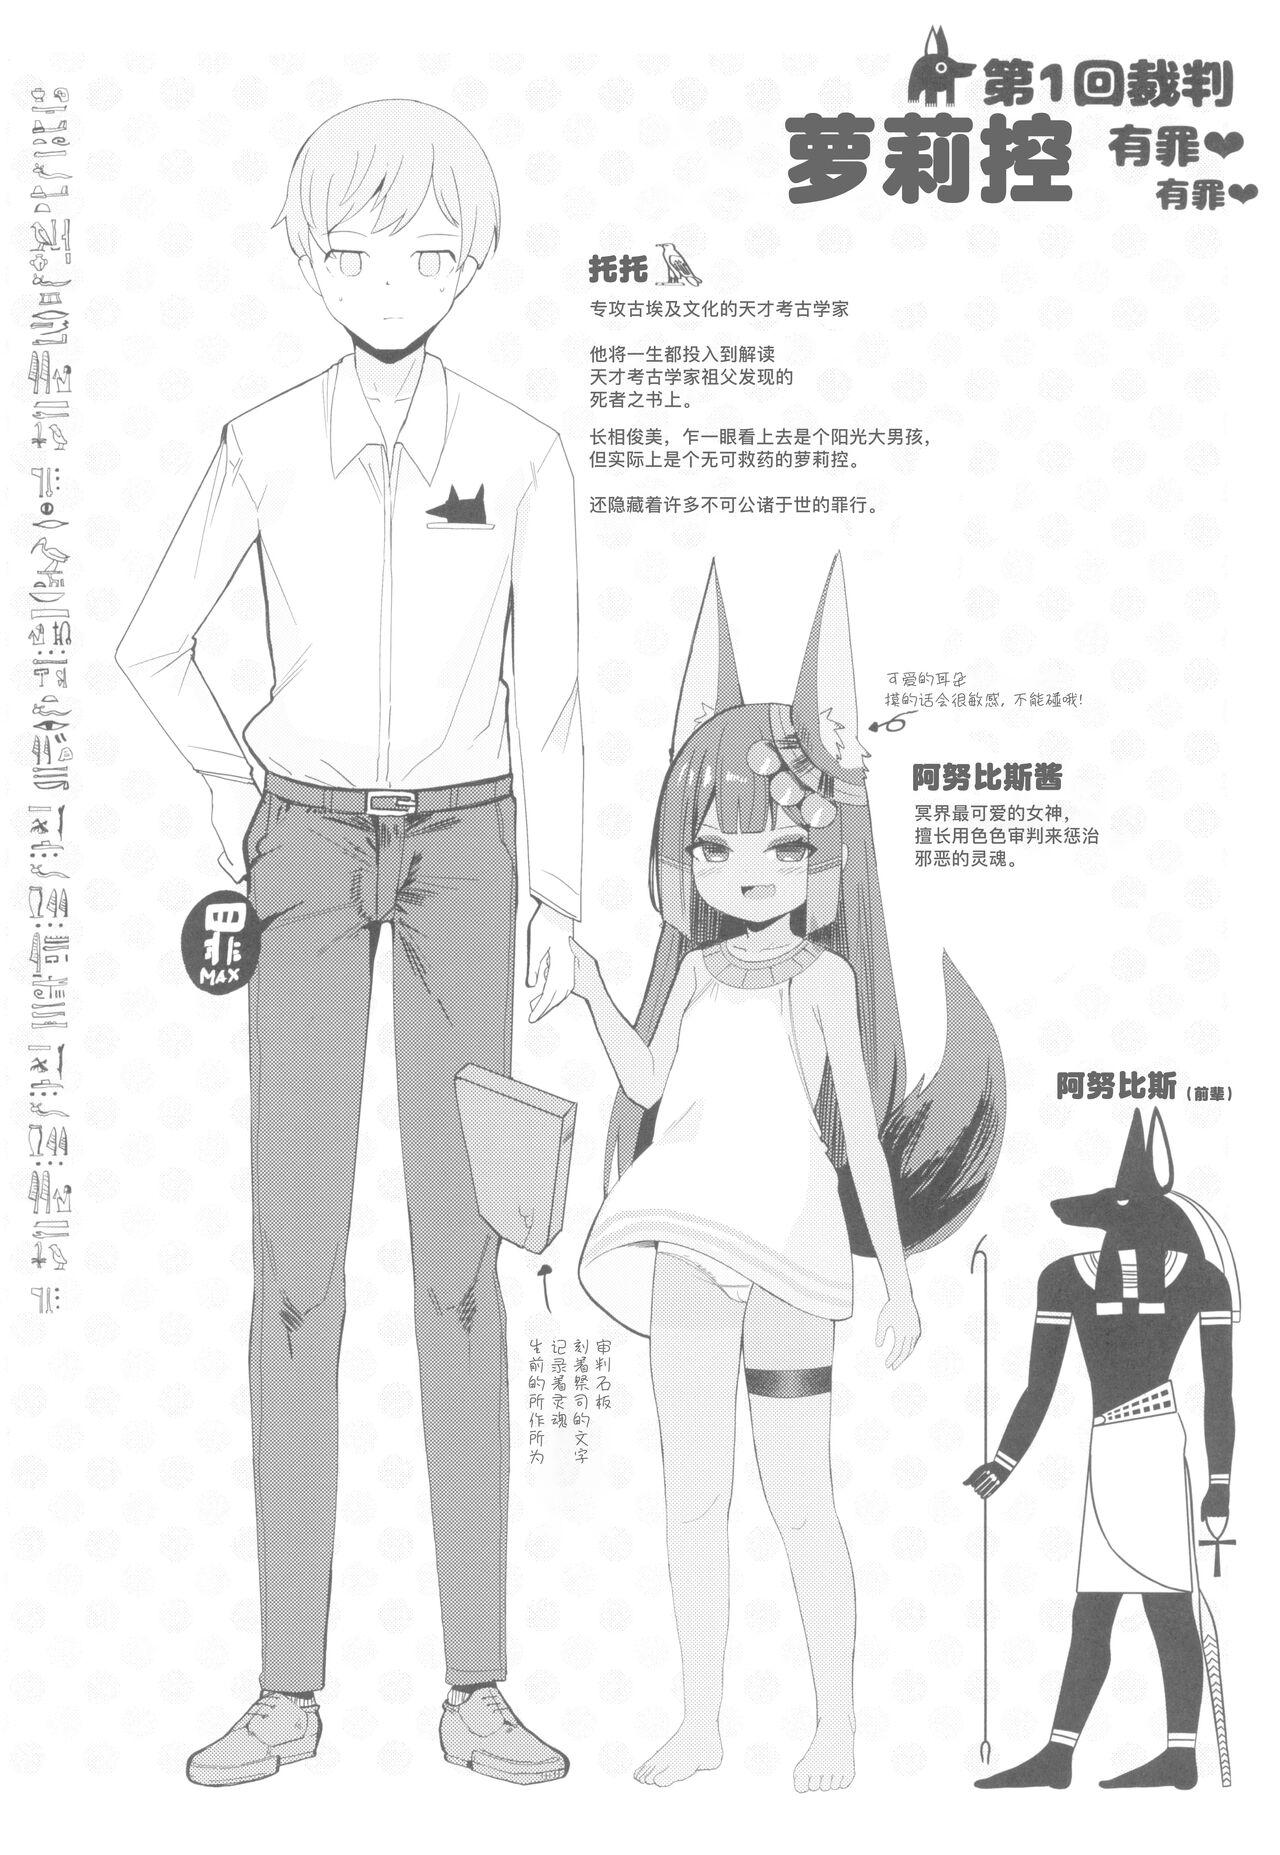 Gay Tattoos Anubis no Ero Shisha Shinpan - She is the oldest FBI in human history and will find souls who have erotic thoughts about loli | 阿努比斯的色色死者审判 - Original Female - Page 4